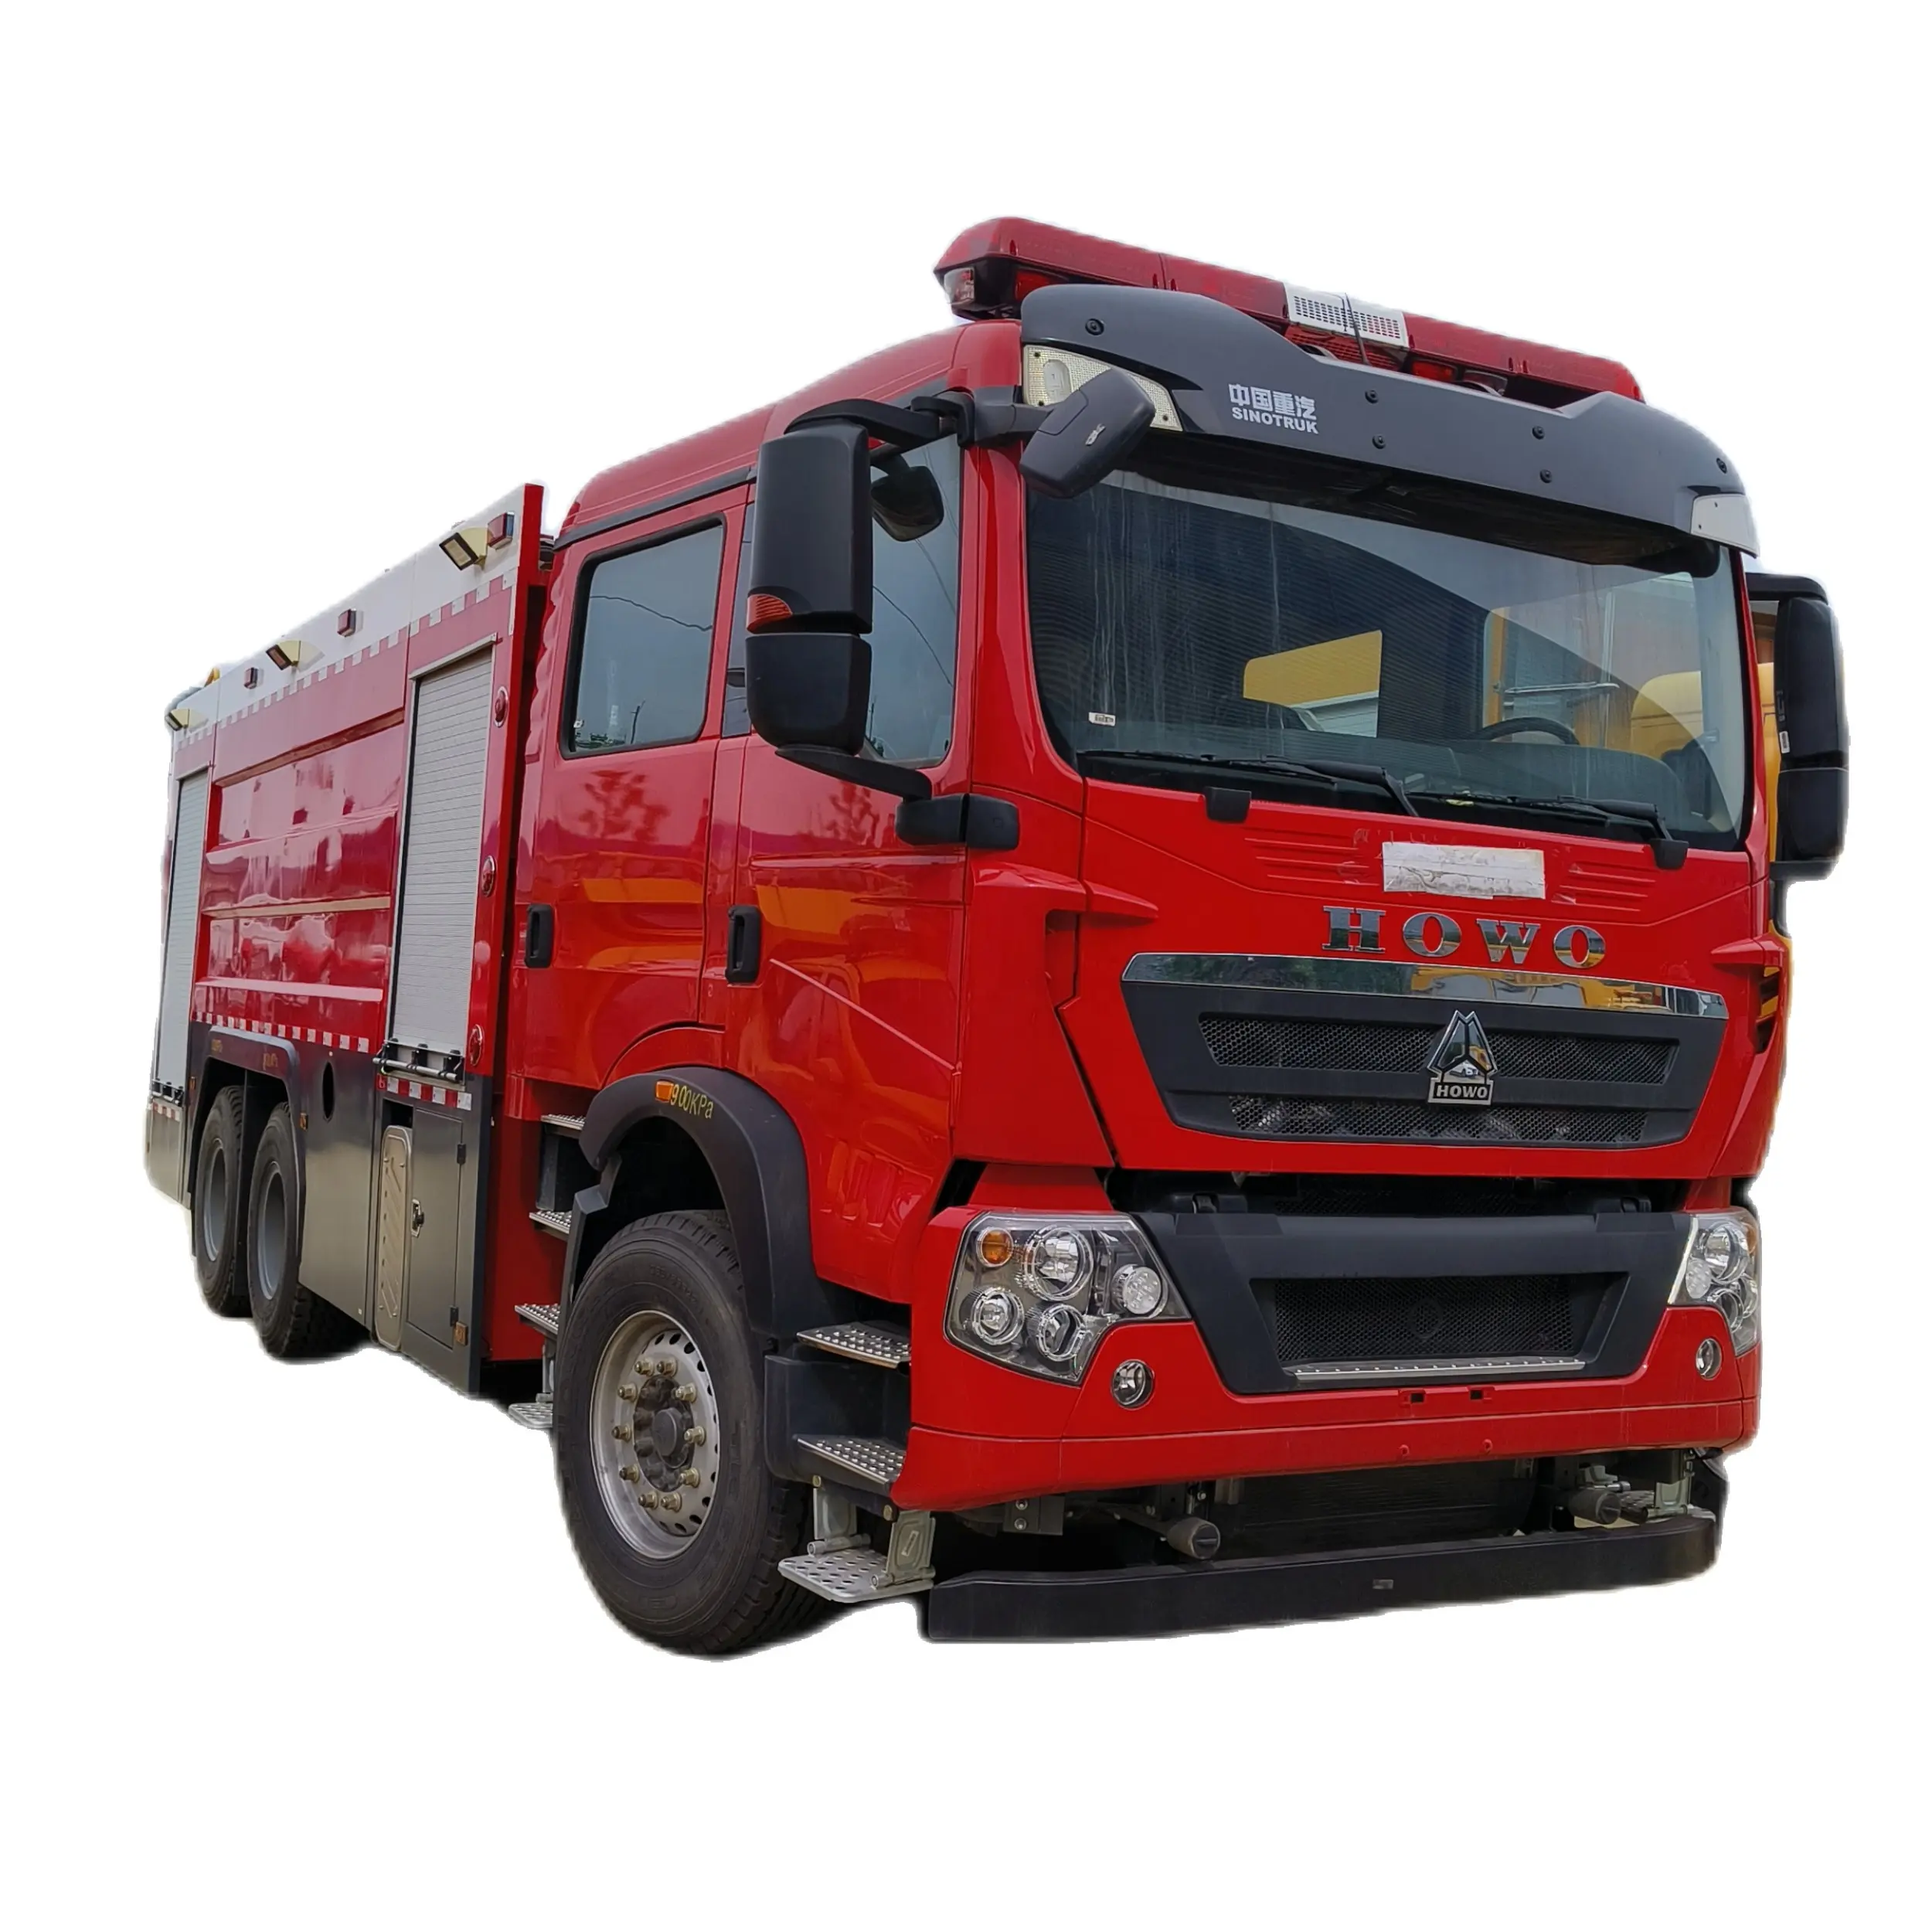 New 6x4 10 wheels Sinotruk Howo Mercedes Benz Hino fire truck for sale with good quality